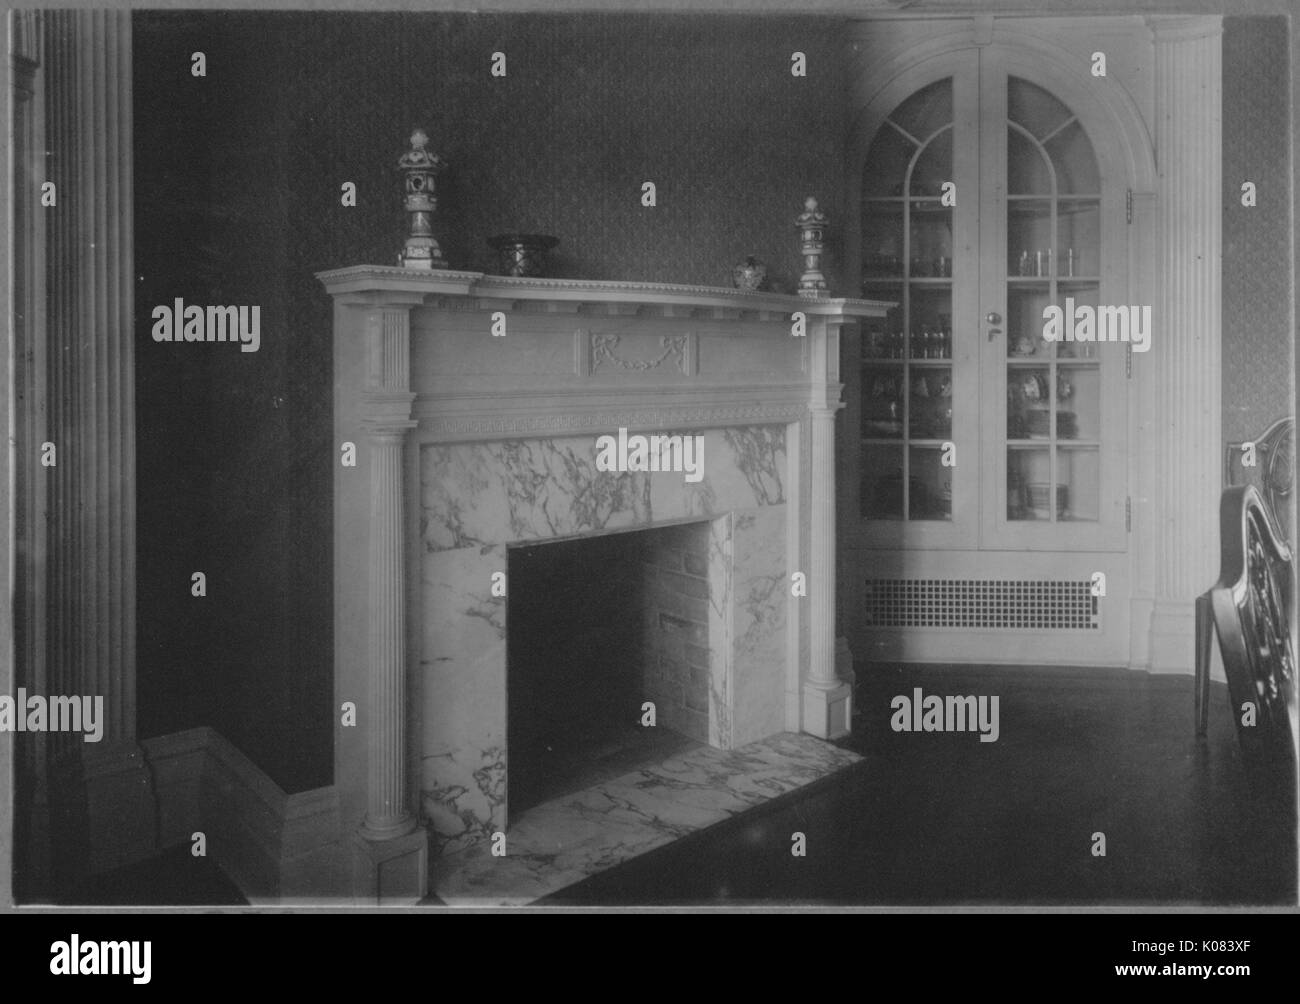 Interior of Baltimore home, featuring base molding, patterned wallpaper, a marble fireplace with a mantelpiece on which sit decorative goods, a built-in corner cabinet with various tableware on display, and a partial view of two ornate wooden chairs, Baltimore, Maryland, 1910. This image is from a series documenting the construction and sale of homes in the Roland Park/Guilford neighborhood of Baltimore, a streetcar suburb and one of the first planned communities in the United States. Stock Photo